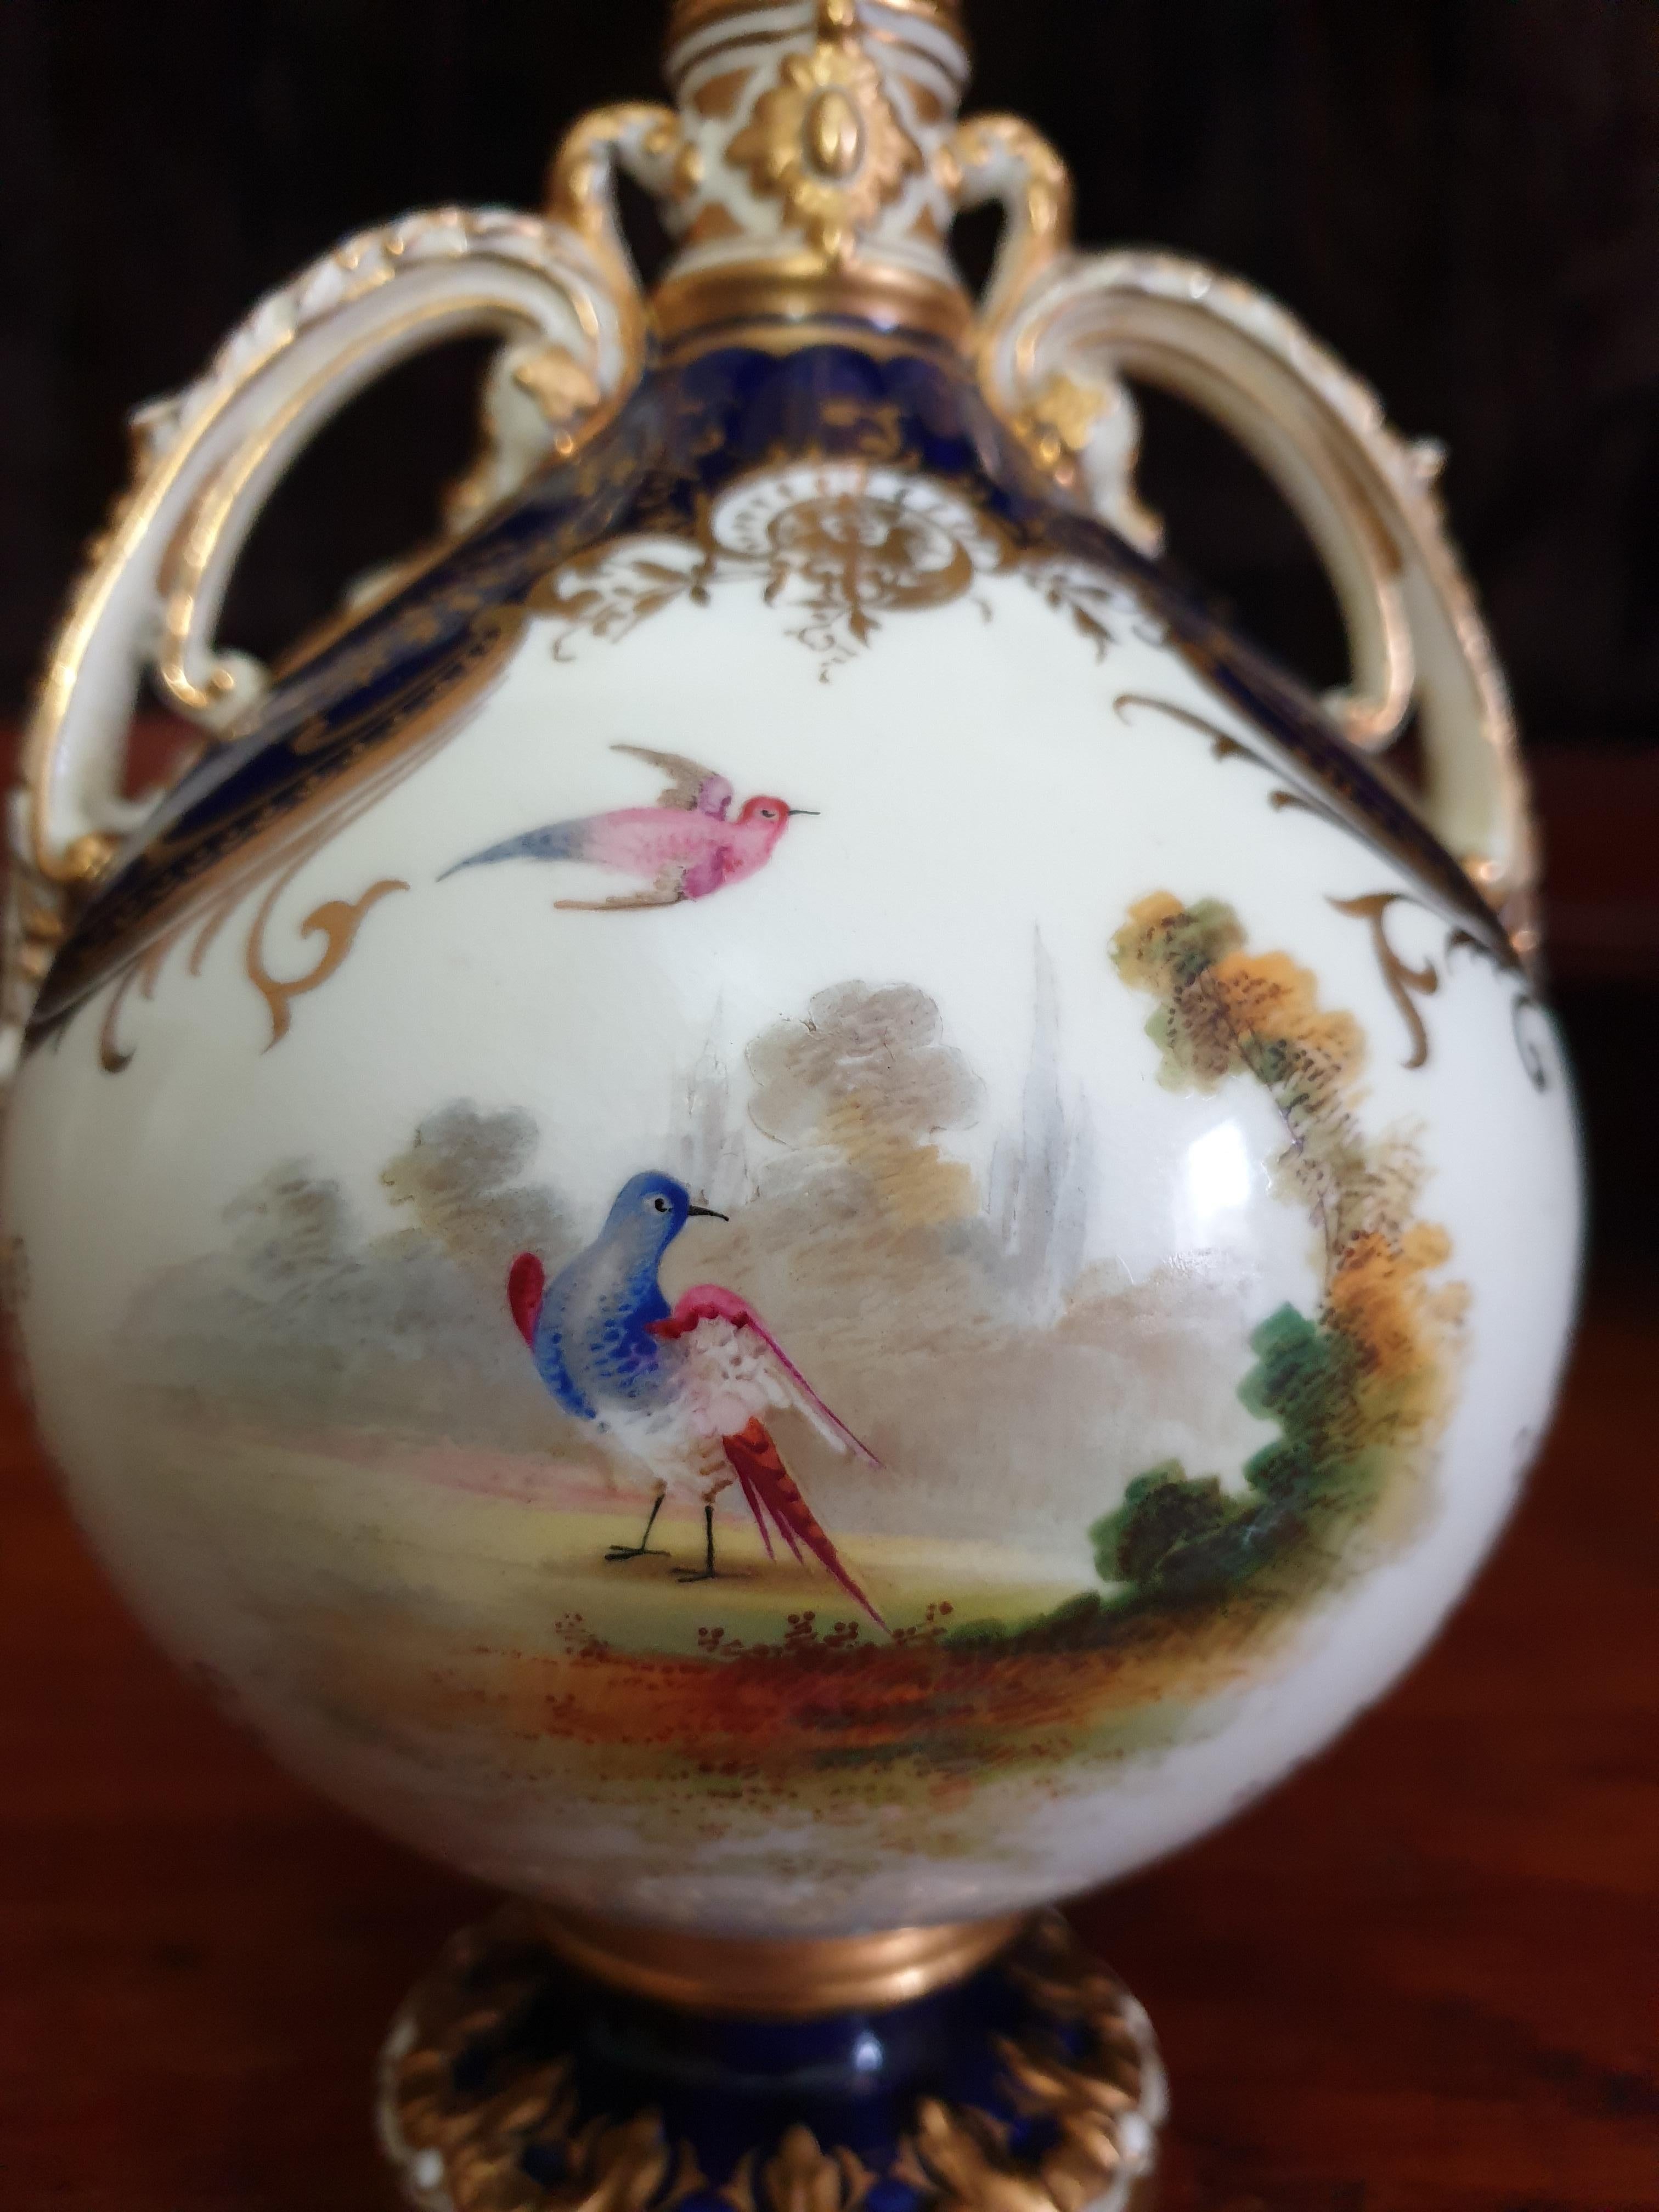 A delightful Coalport hand painted bird vase in oval form with a slender neck. The front panel is decorated with scenes of nature and birds on an off white and cobalt blue ground. Acanthus moulded twin handles with gilt on either sides stems from